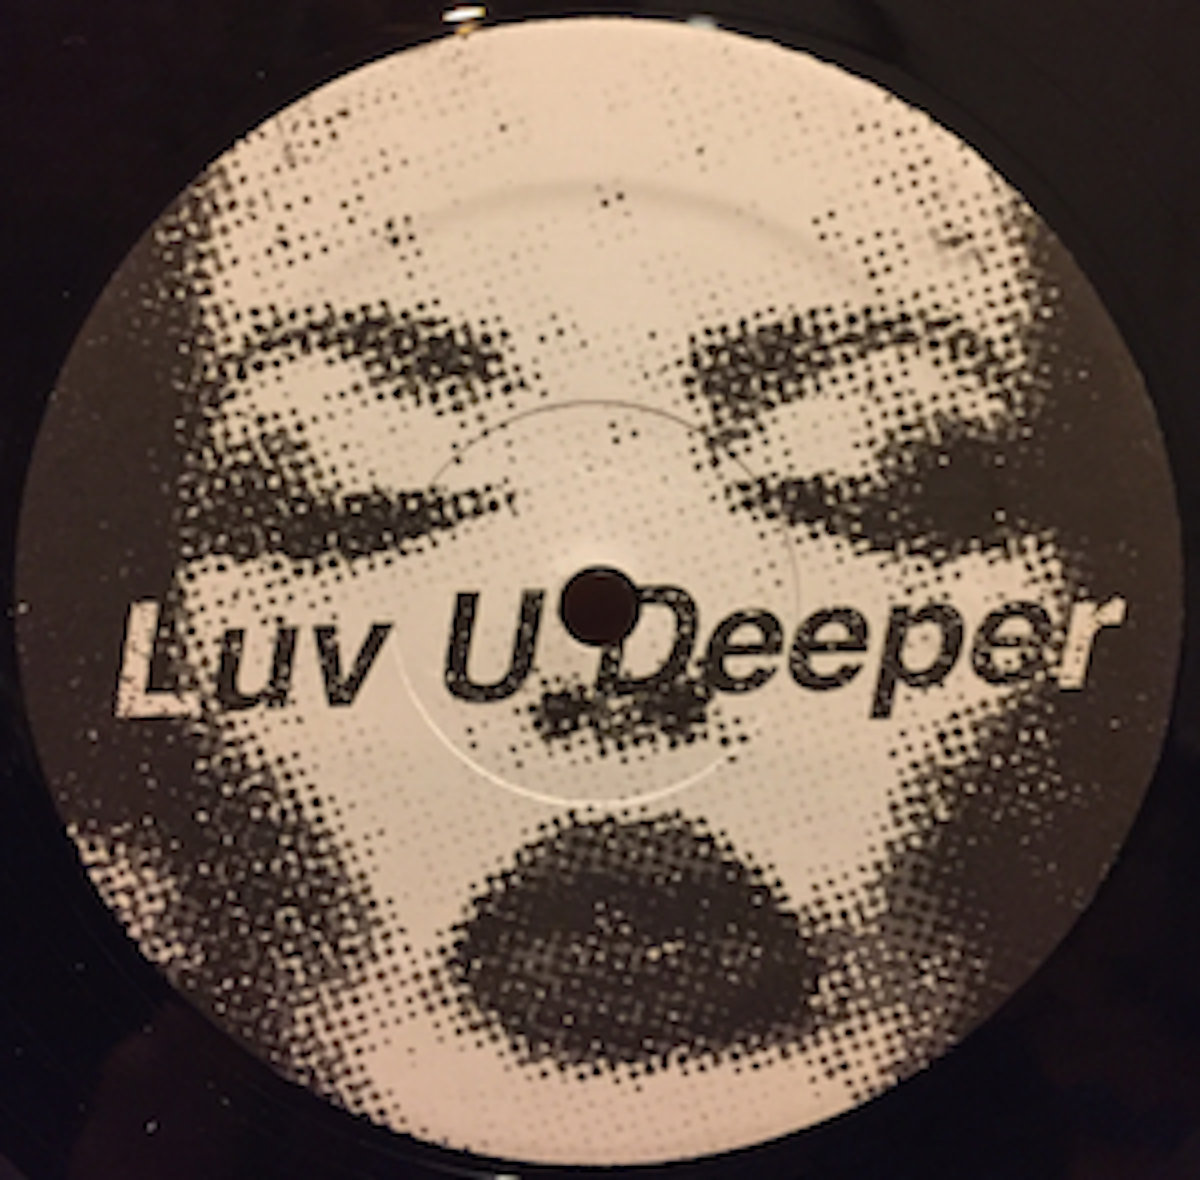 Jesse Outlaw Feat. Bill Beaver - Luv U Deeper (incl. ANTHONY NAPLES remix) : 12inch